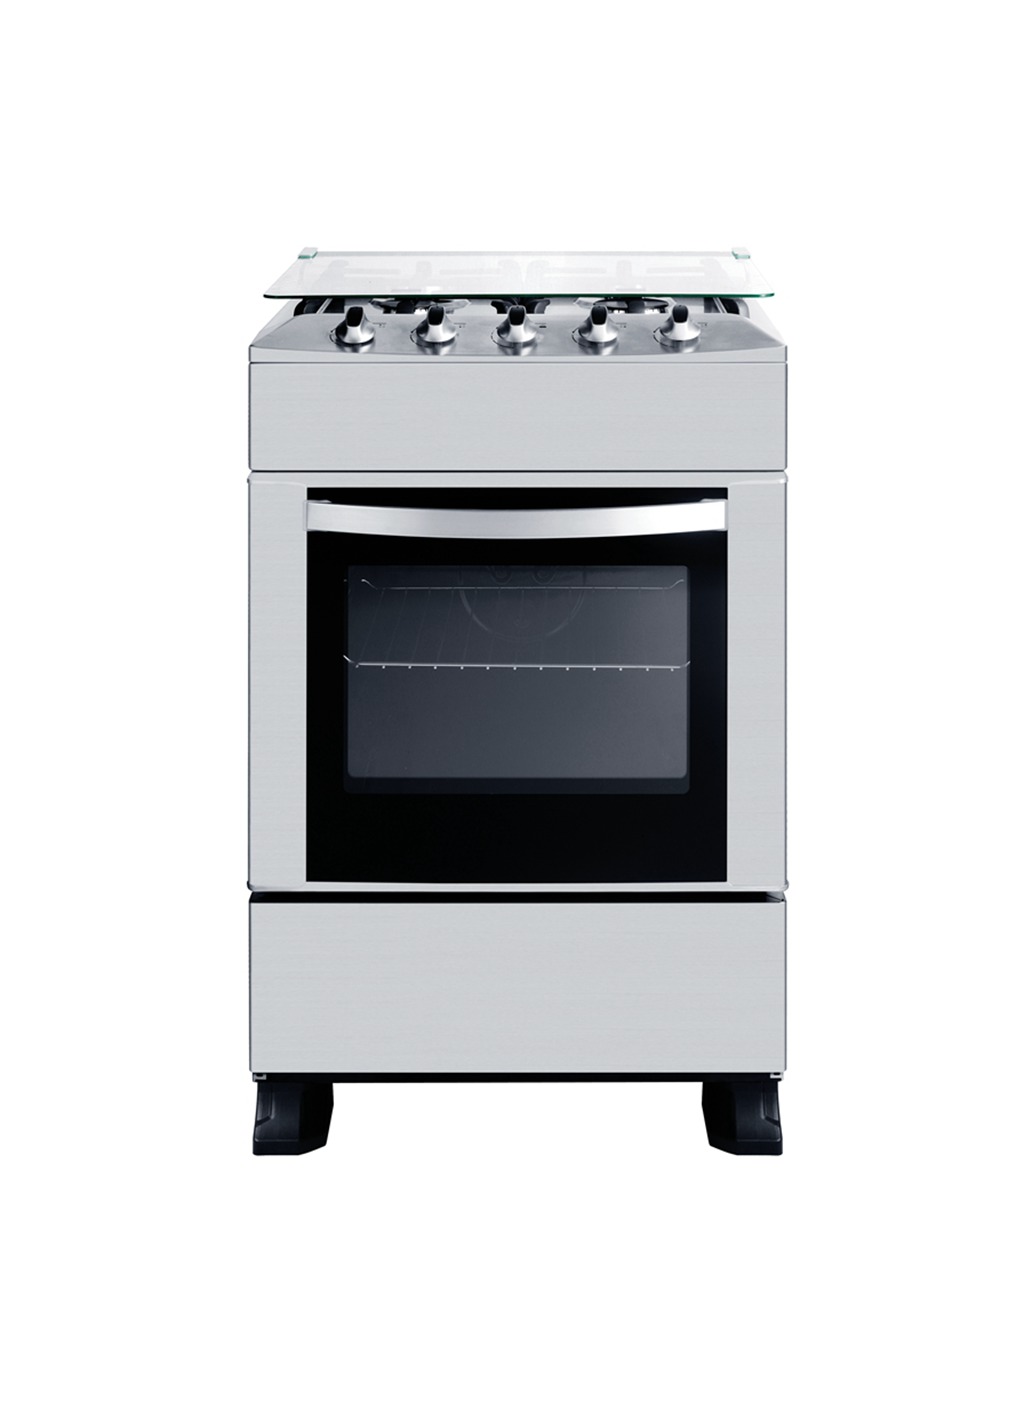 4 Burners Gas Oven With Glass Cover